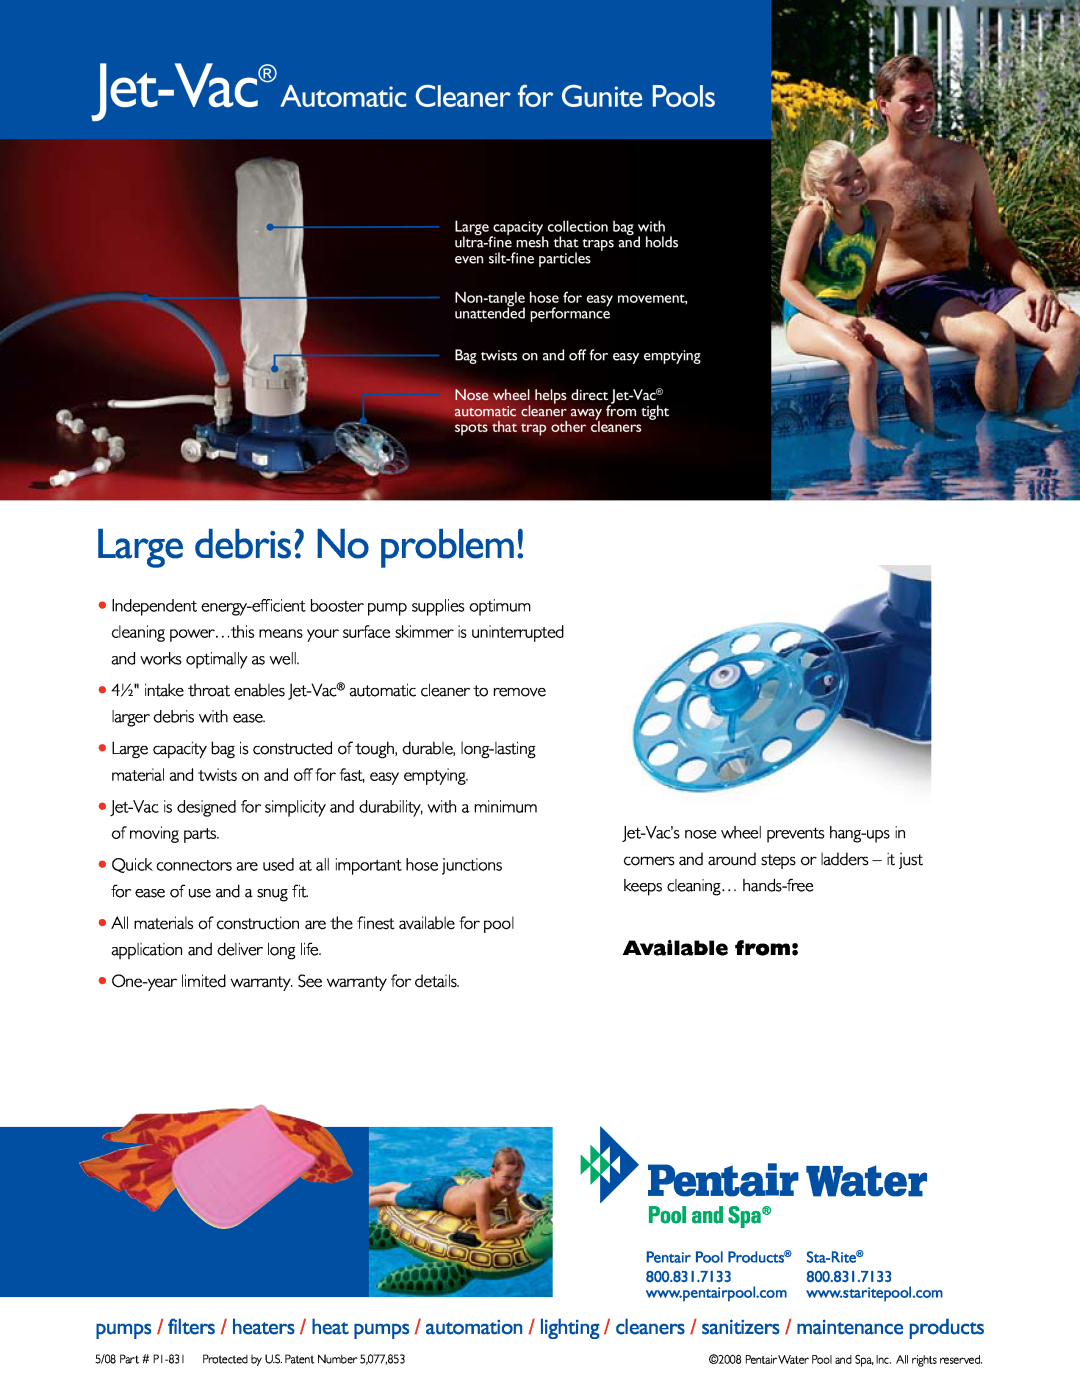 Pentair manual Large debris? No problem, Jet-Vac Automatic Cleaner for Gunite Pools, Available from 